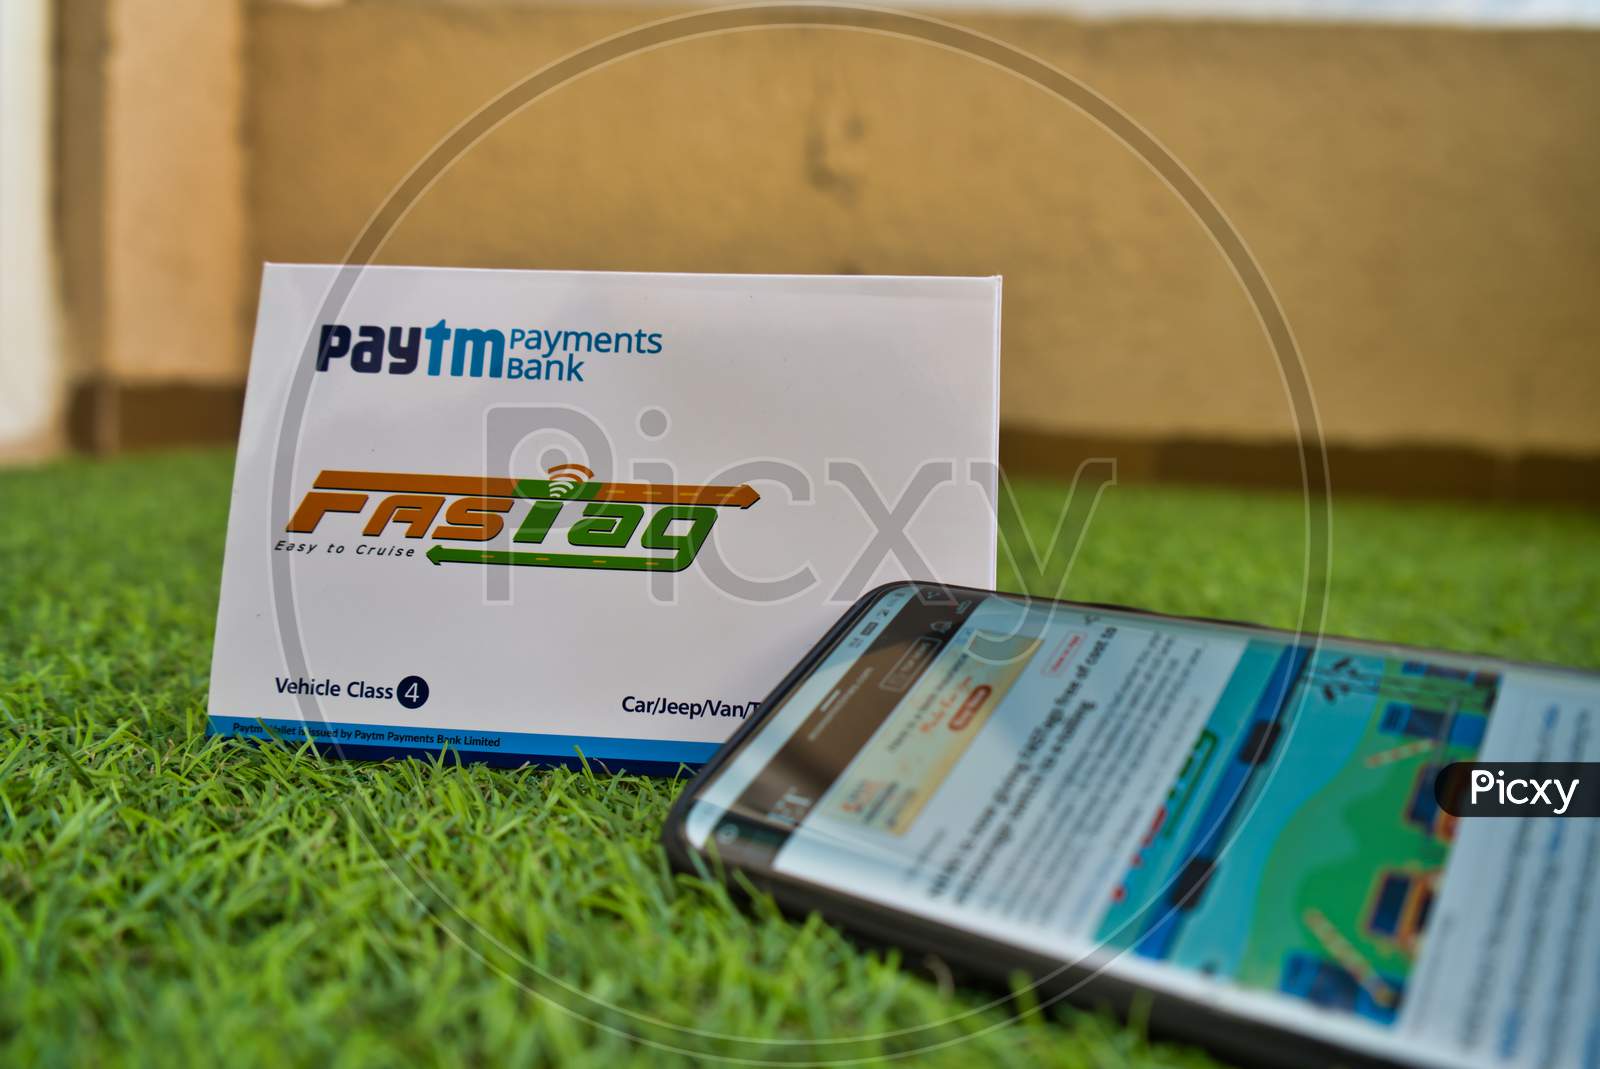 Fast Tag Provided By Paytm Payment Bank On Green Grass With A Mobile Phone Logged Into Fast Tag Website.